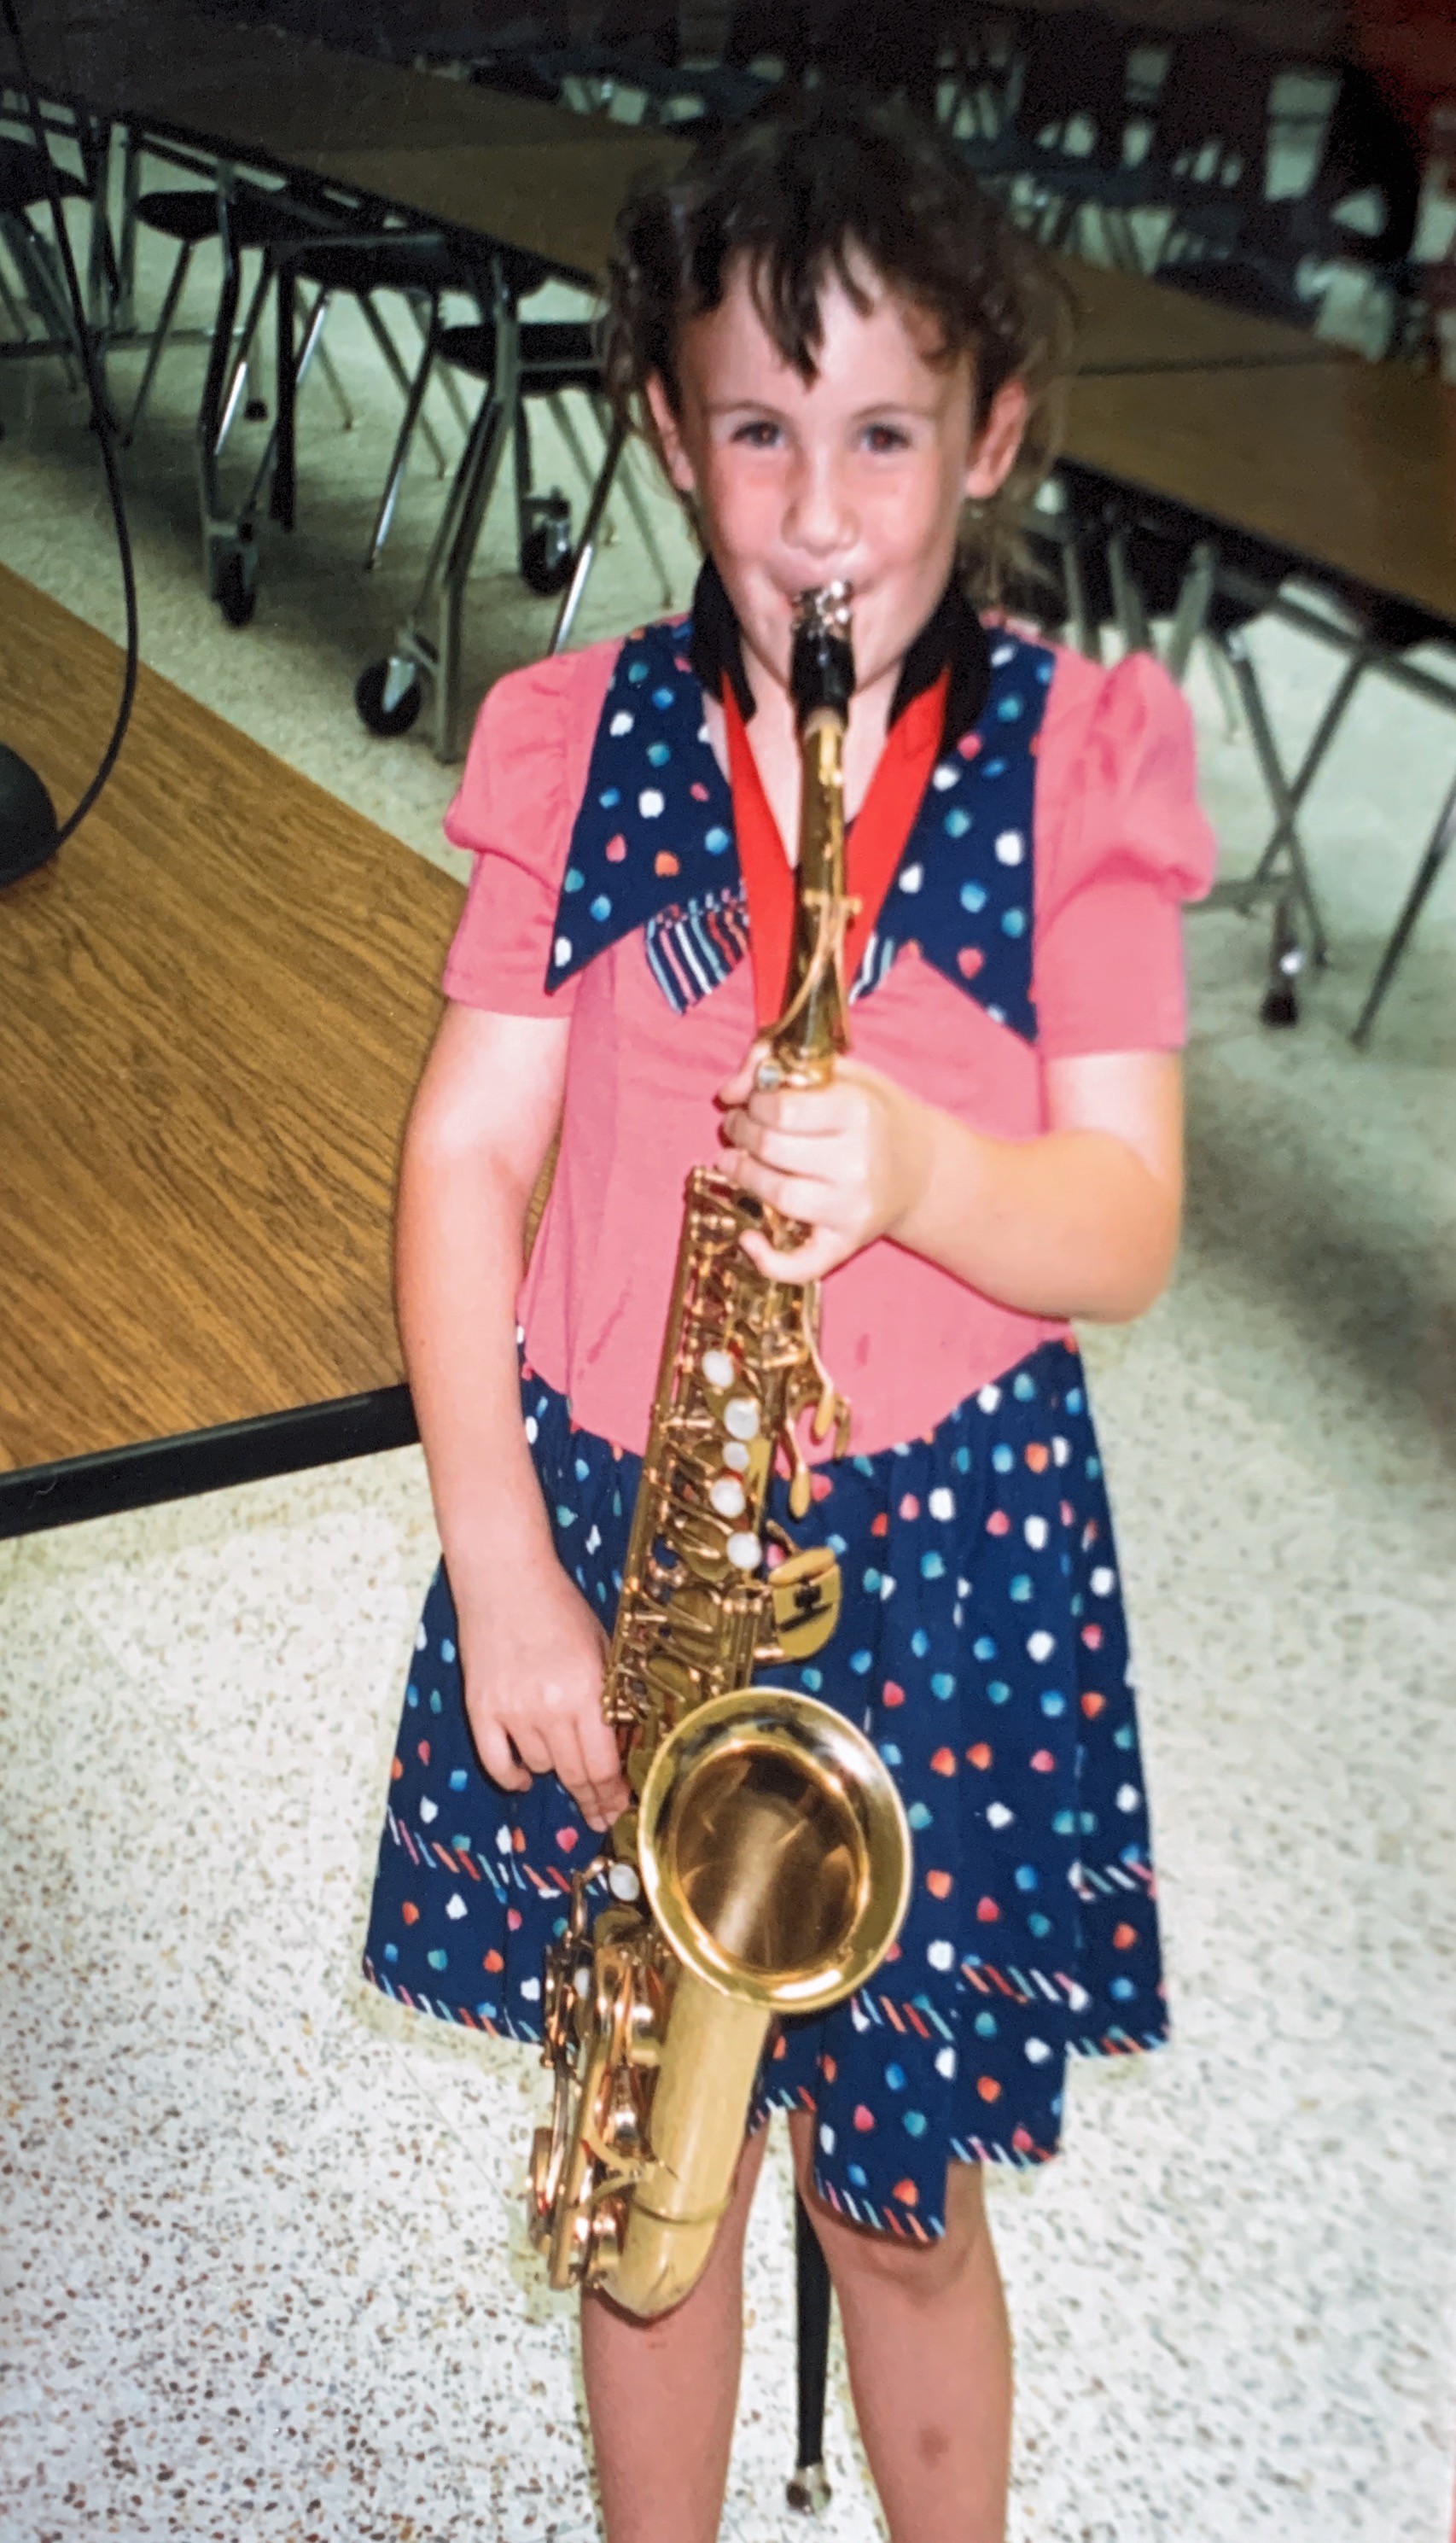 Playing on Kristi’s saxophone after a band concert 1994